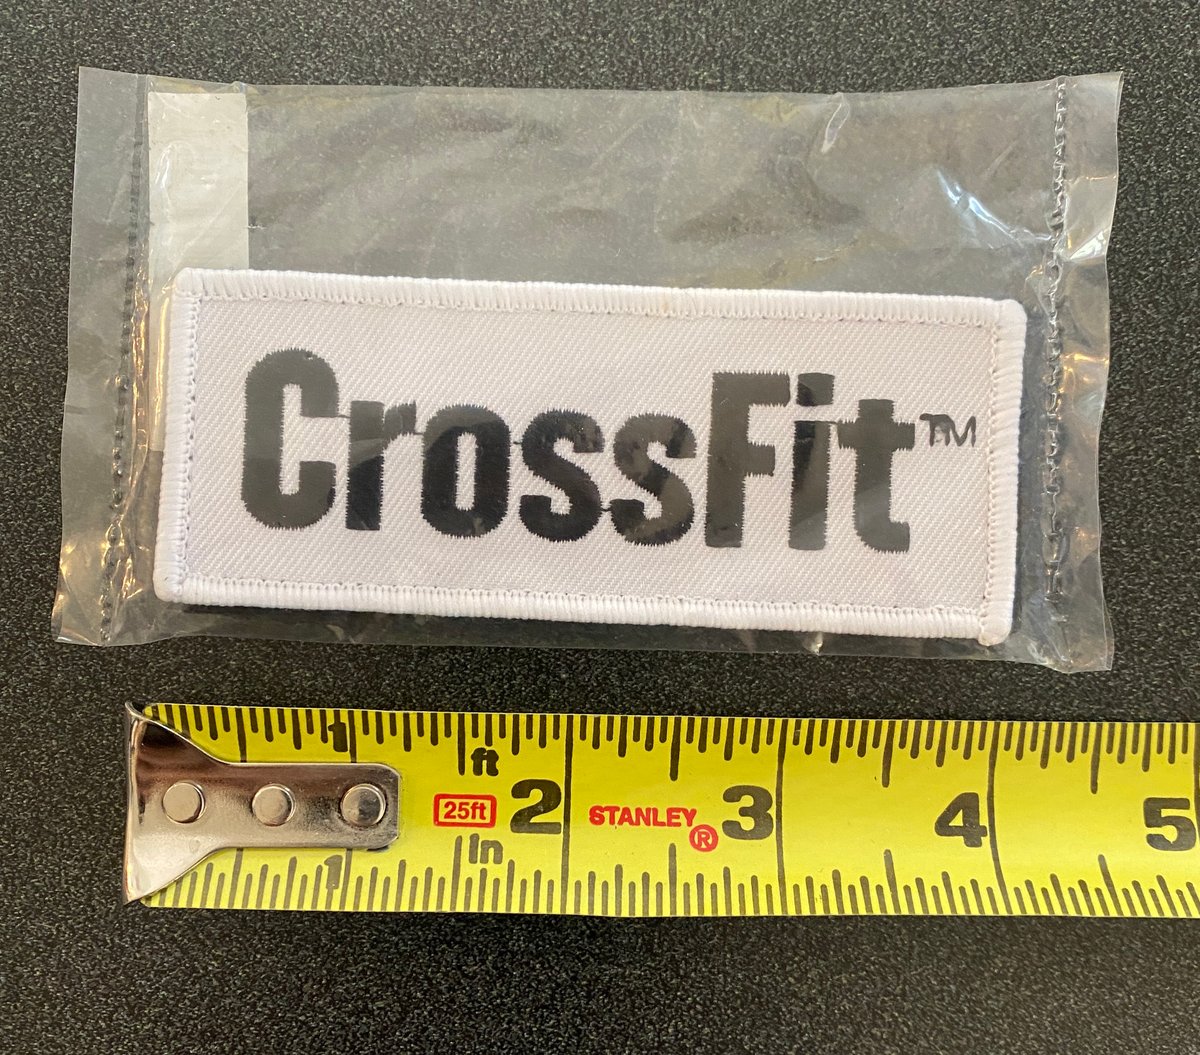 CrossFit White with Black logo patch 4 x 1 1/2